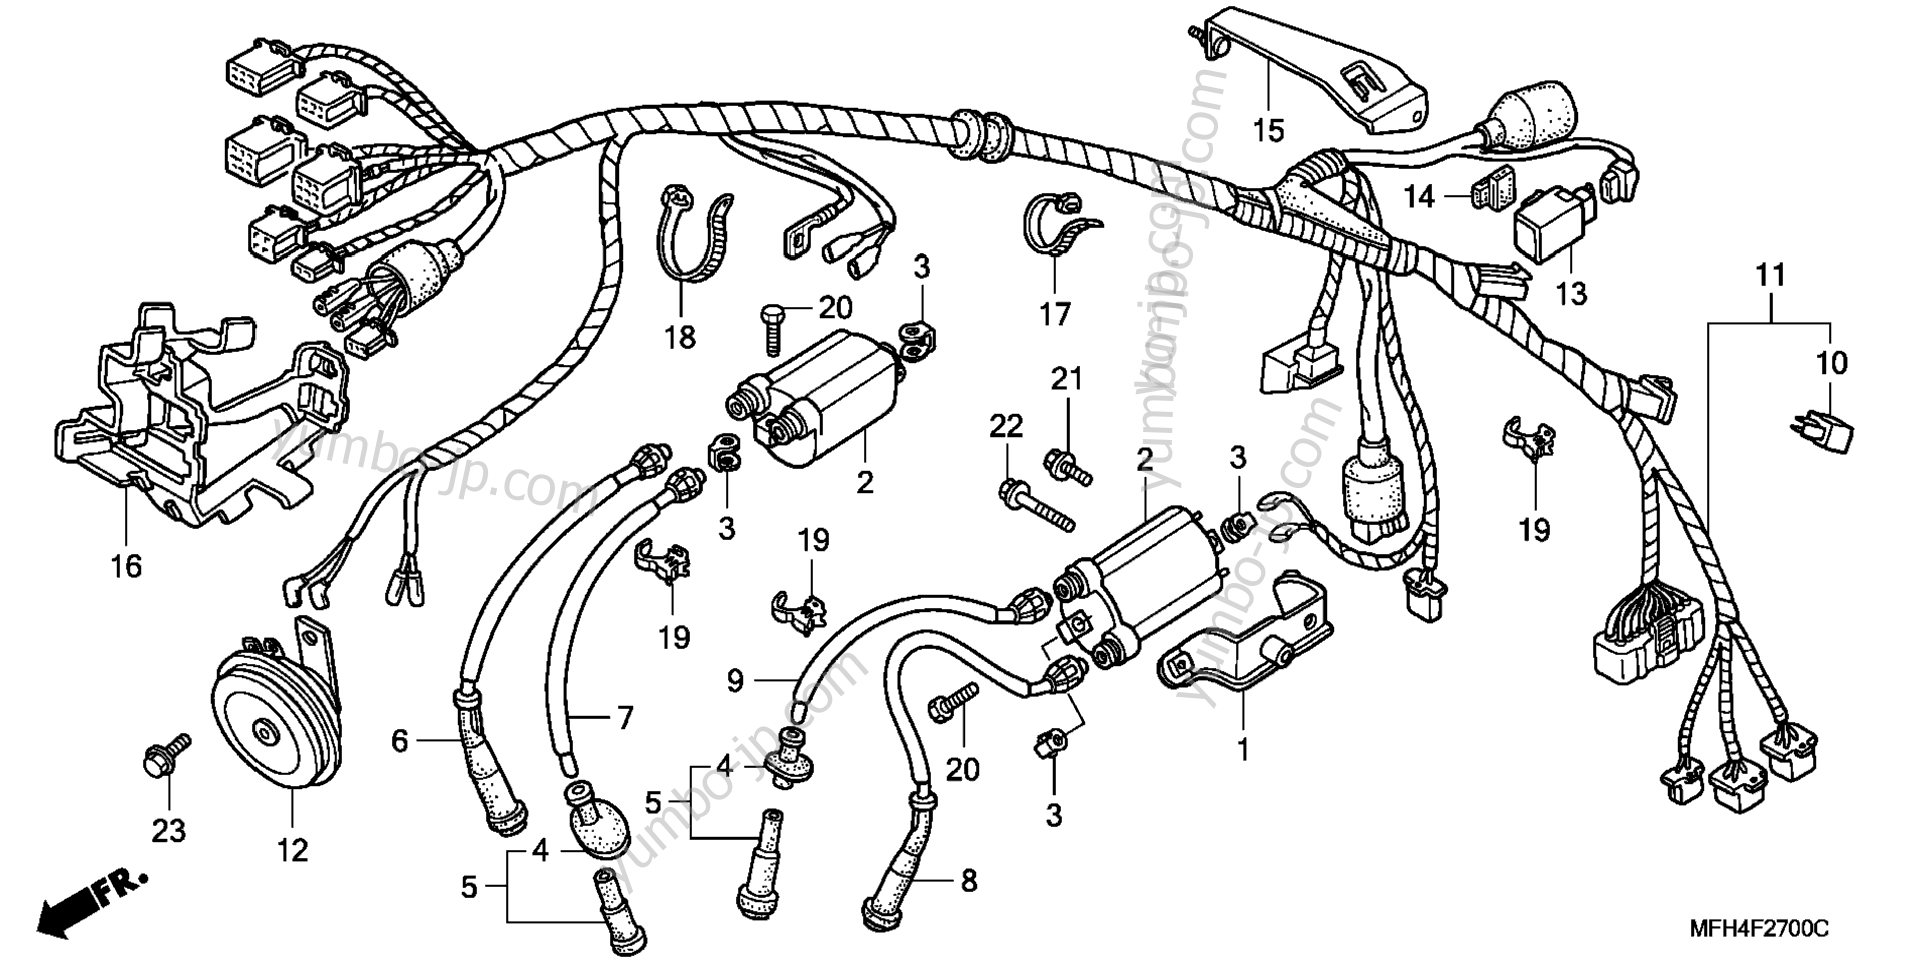 WIRE HARNESS for motorcycles HONDA VT600CD A/A 2006 year